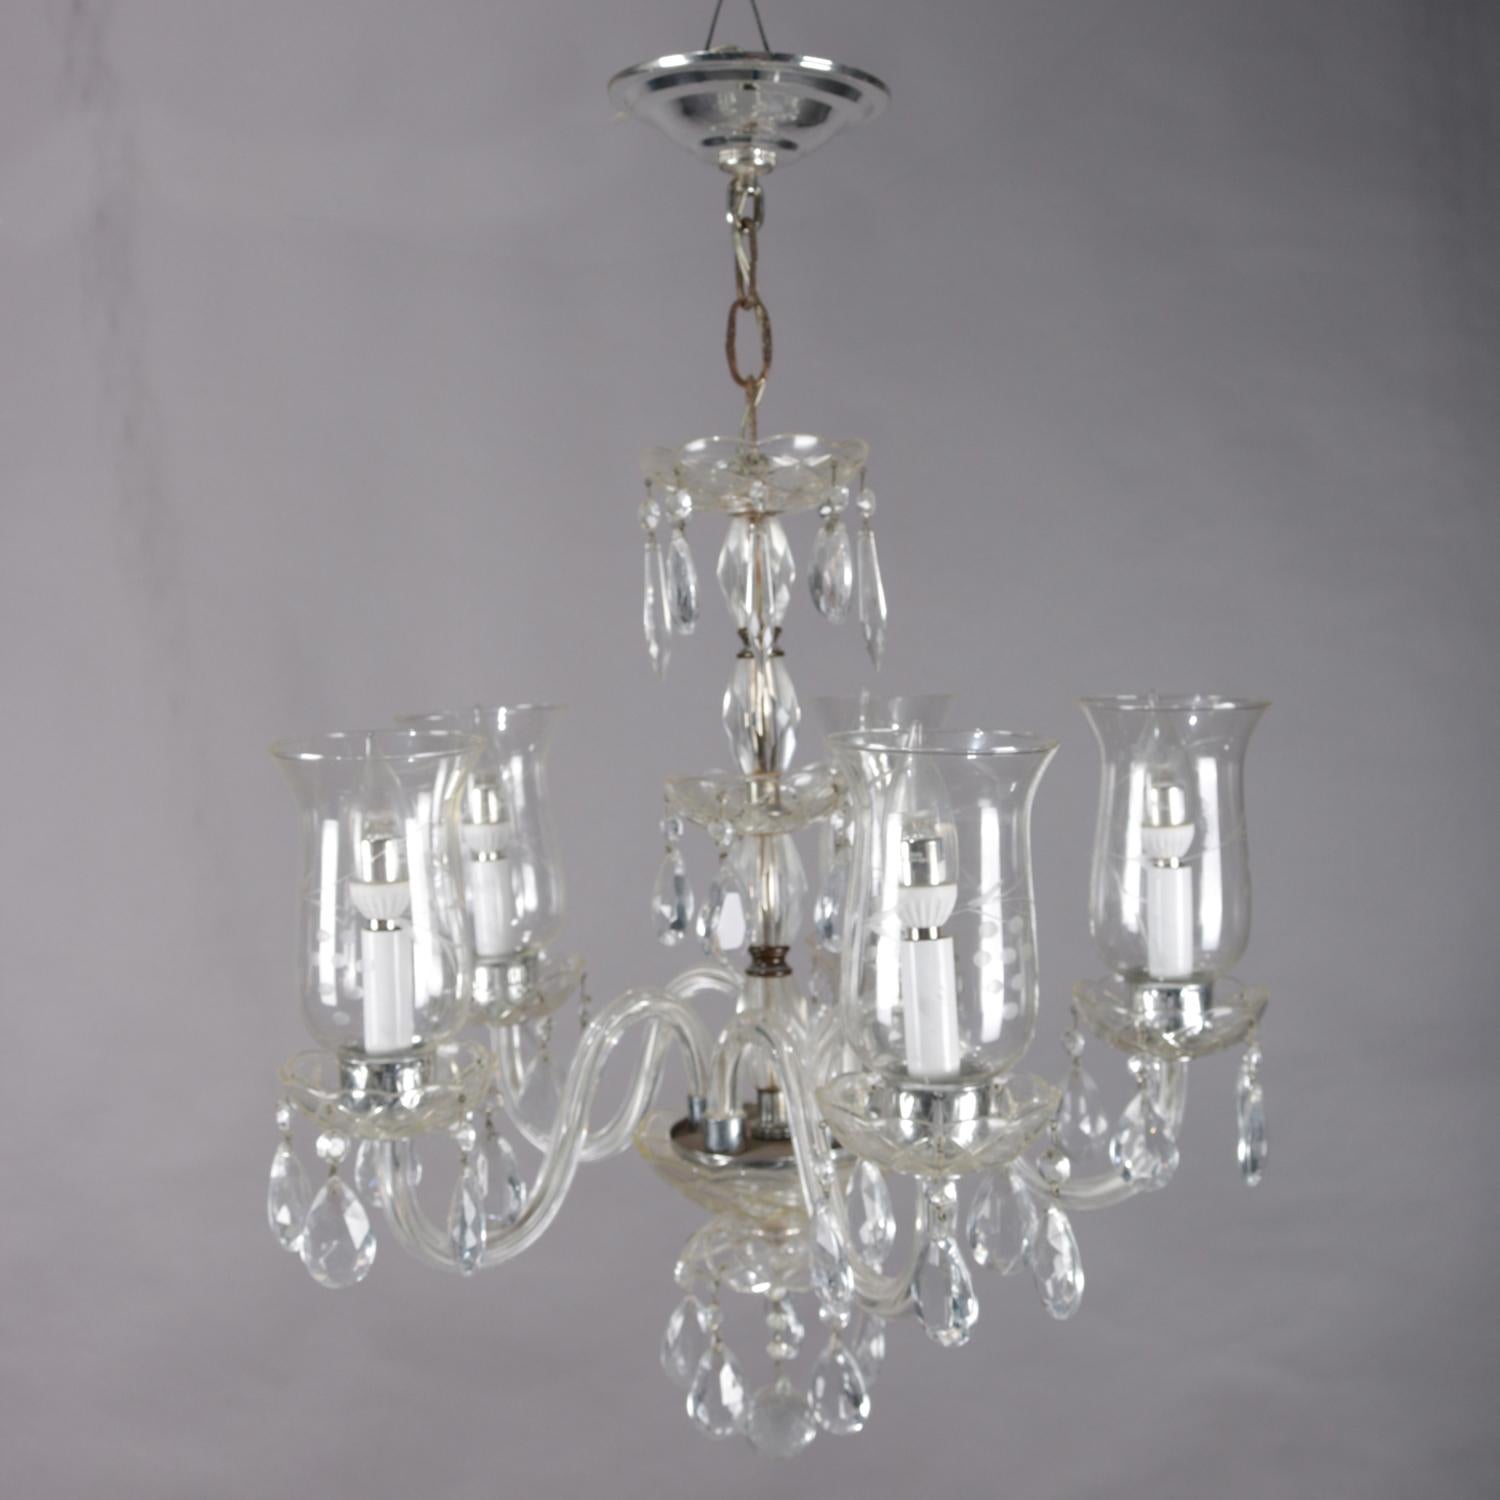 Vintage French chandelier features a chrome frame with central crystal column having s-scroll glass arms terminating in candle lights with etched glass hurricane shades, hanging rock crystal prism highlights throughout, circa 1940.


Measures: 28